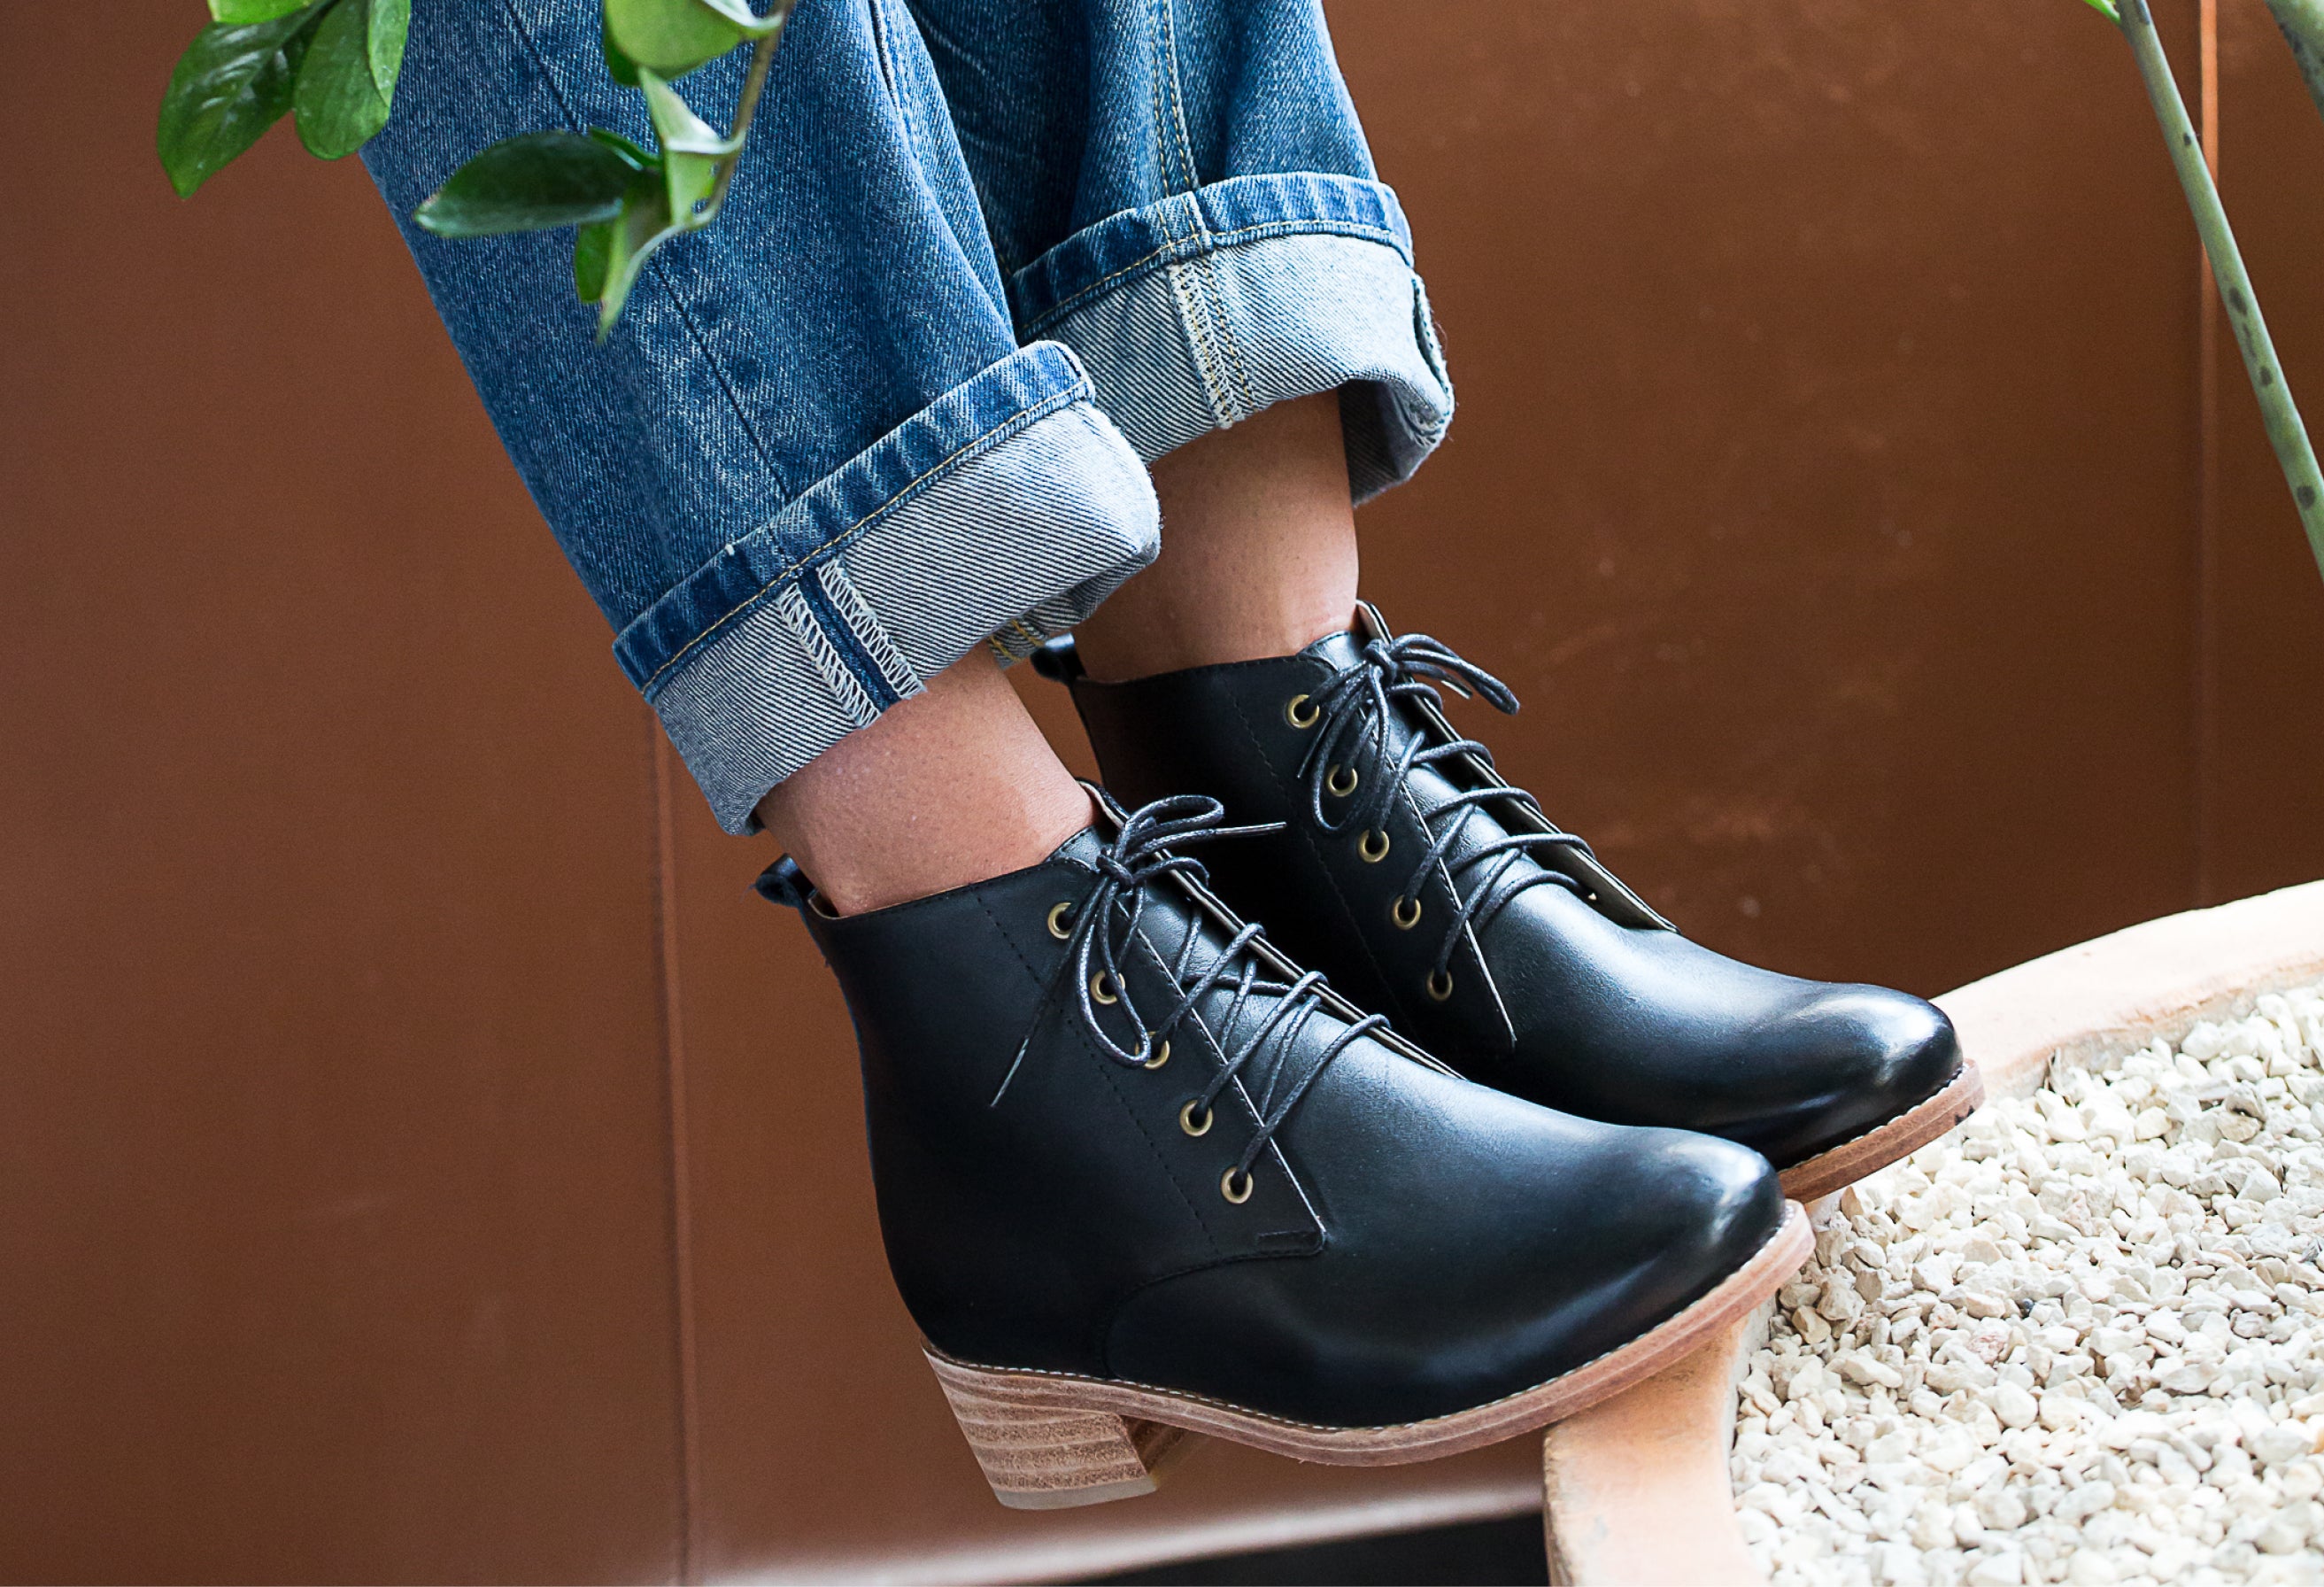 Sugarplum Style Tip | How to Wear Ankle Boots with Skinny Jeans - Hi  Sugarplum!